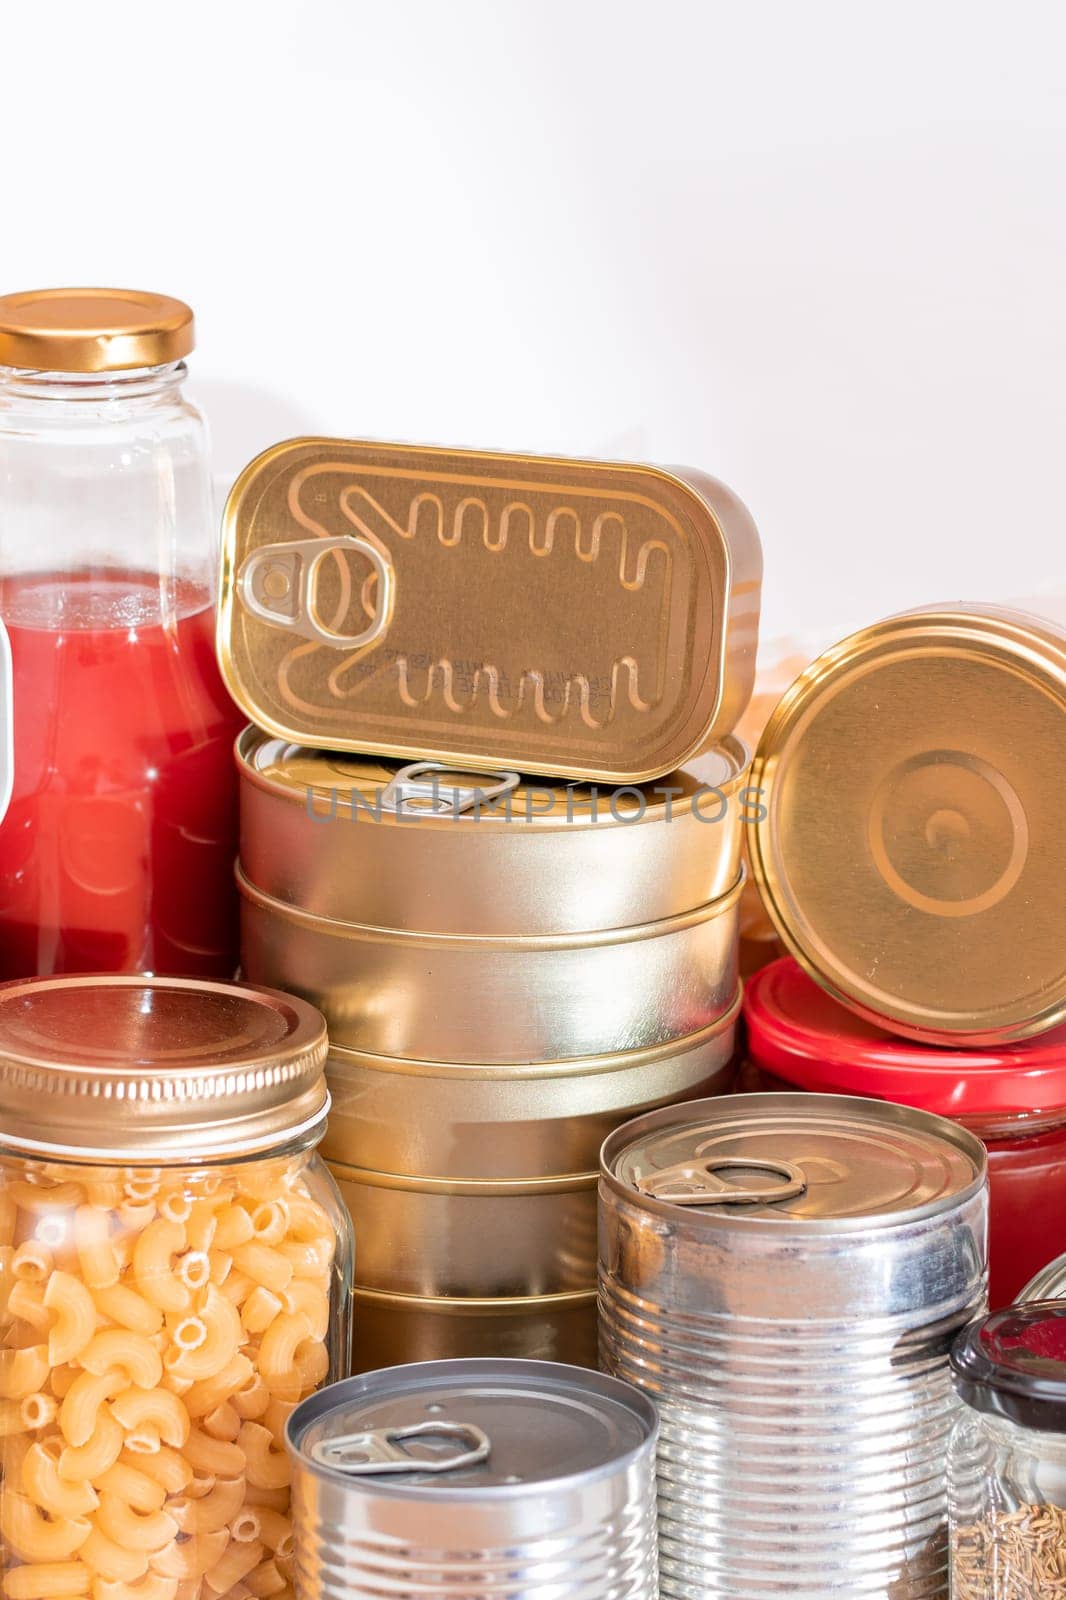 Food Reserves: Canned Food, Spaghetti, Pate, Tuna, Tomato Juice, Pasta, Fish and Grocery by InfinitumProdux